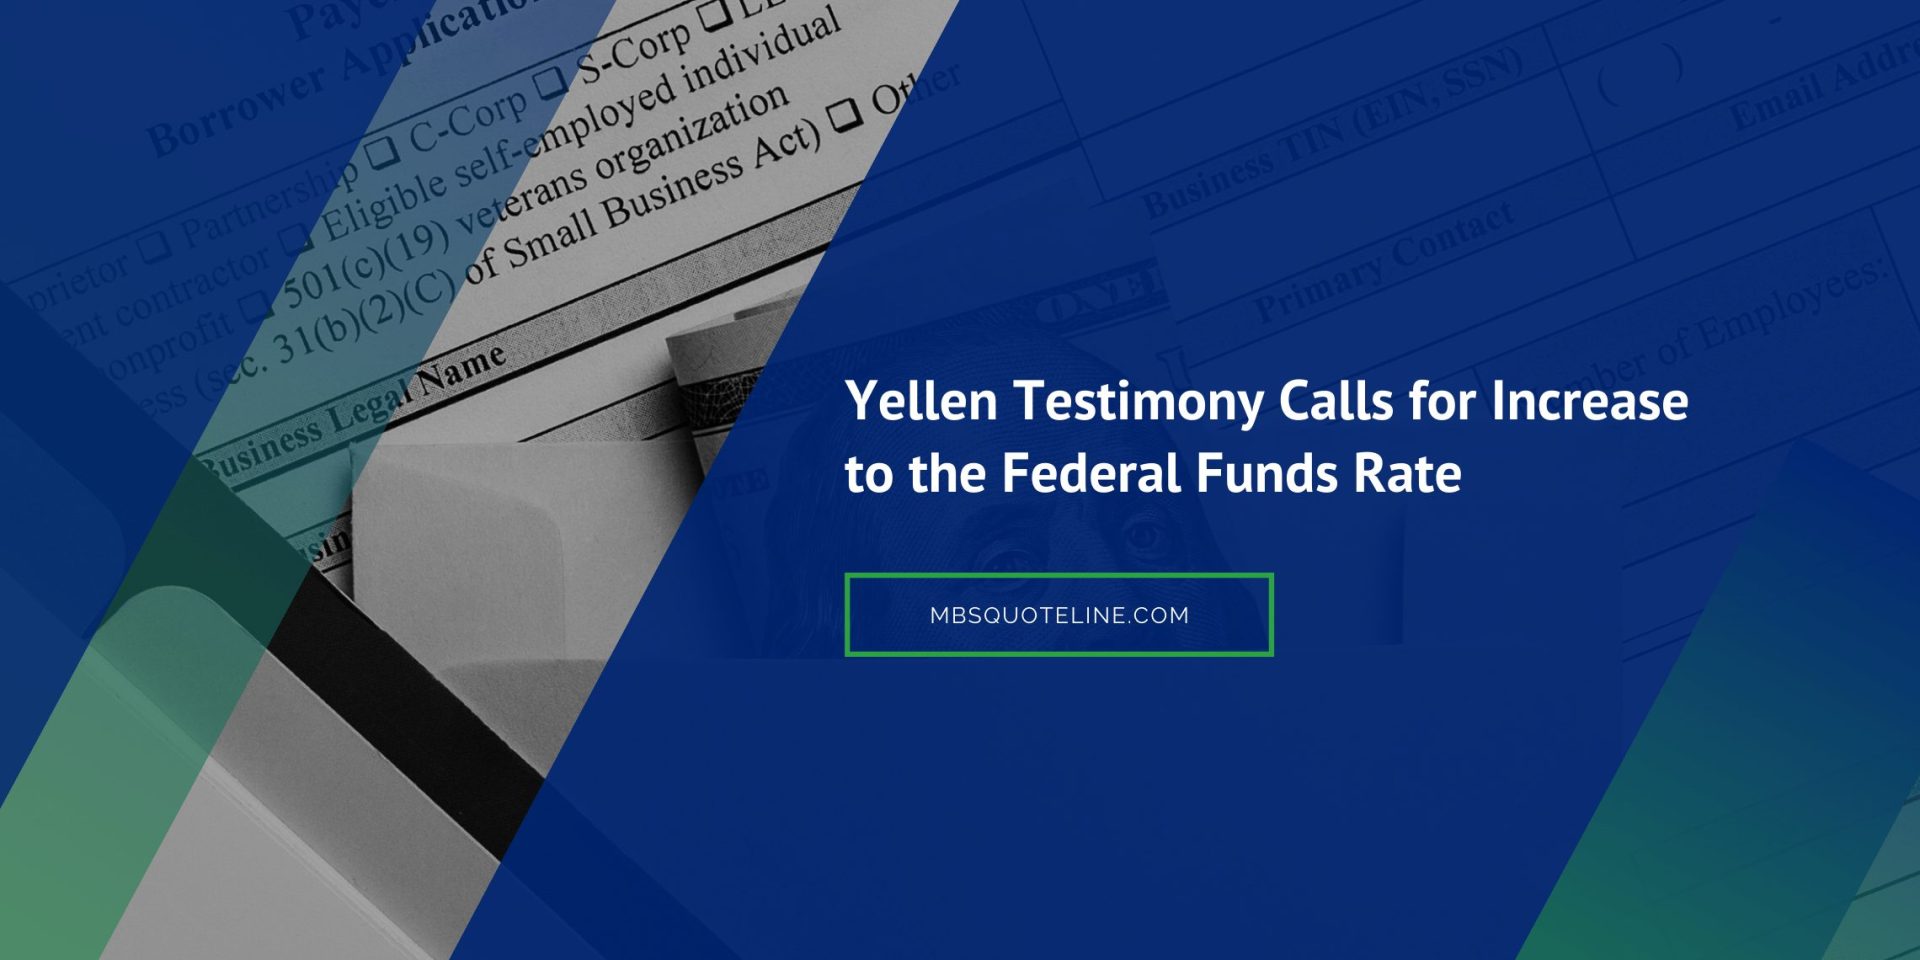 yellen testimony calls for increase to the federal funds rate news mbsquoteline